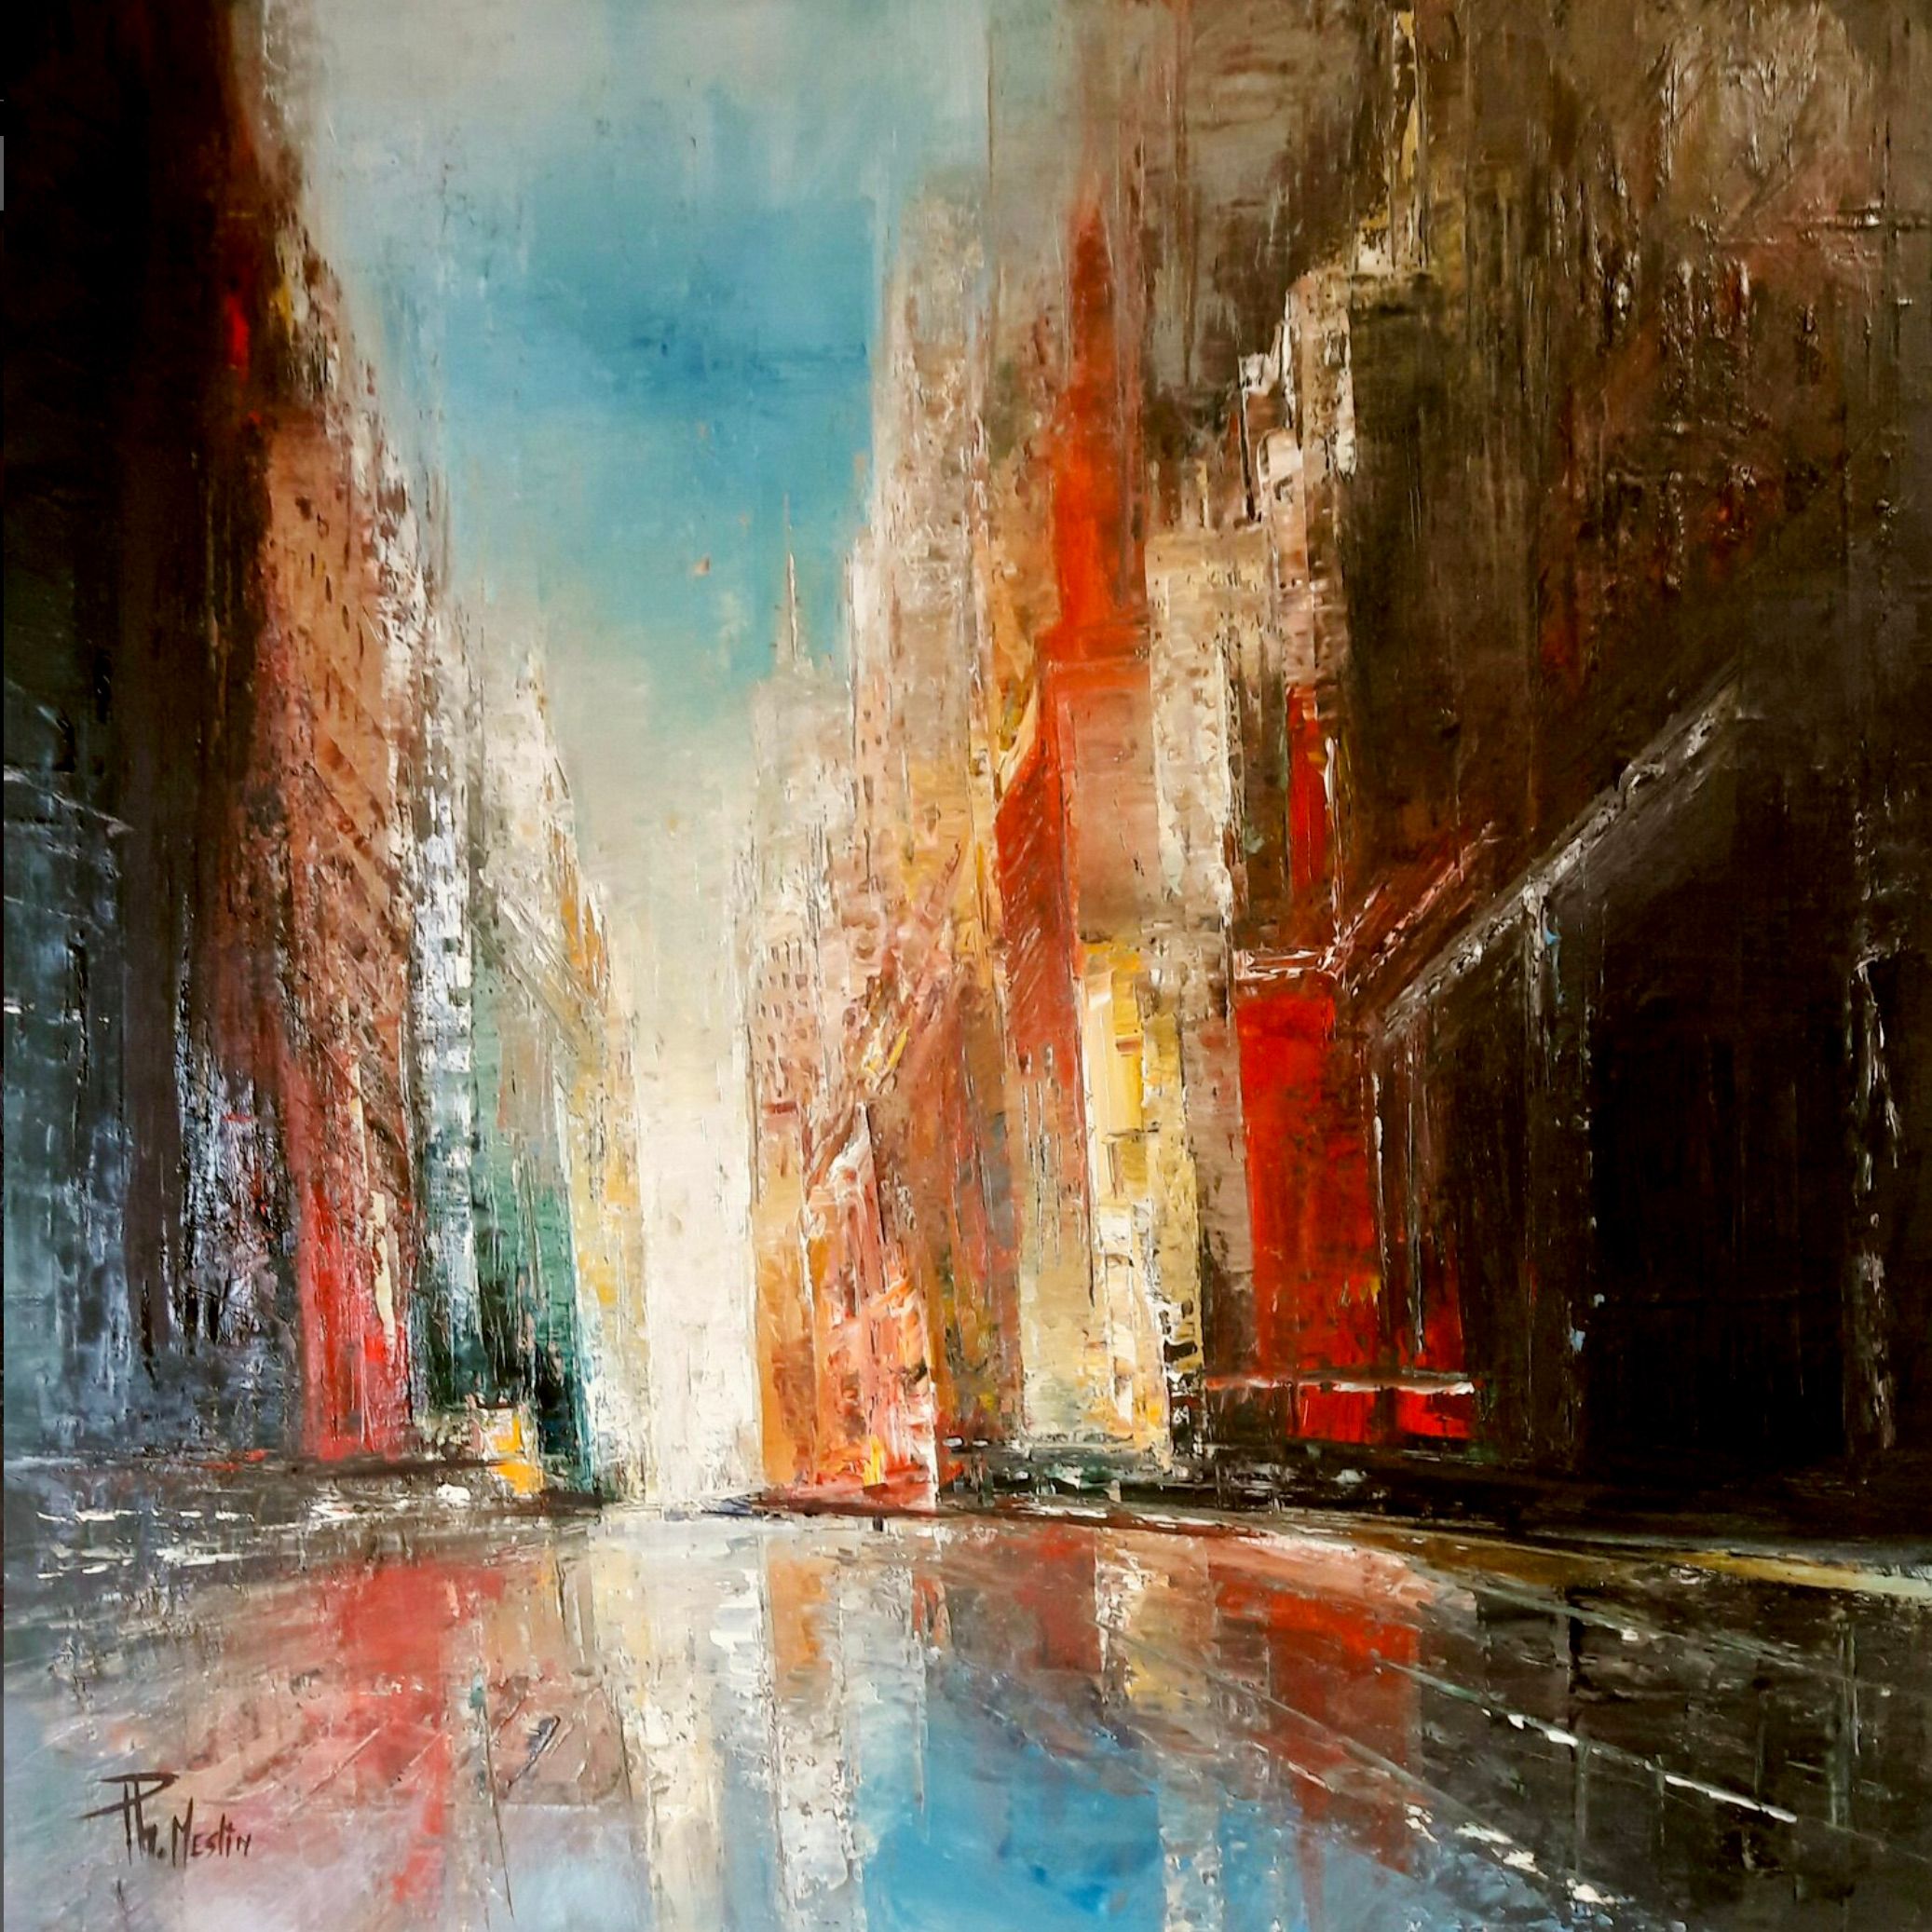 Philippe Meslin "Reflets urbains" painting, is a figurative somewhat abstract coloured oil painting of a city